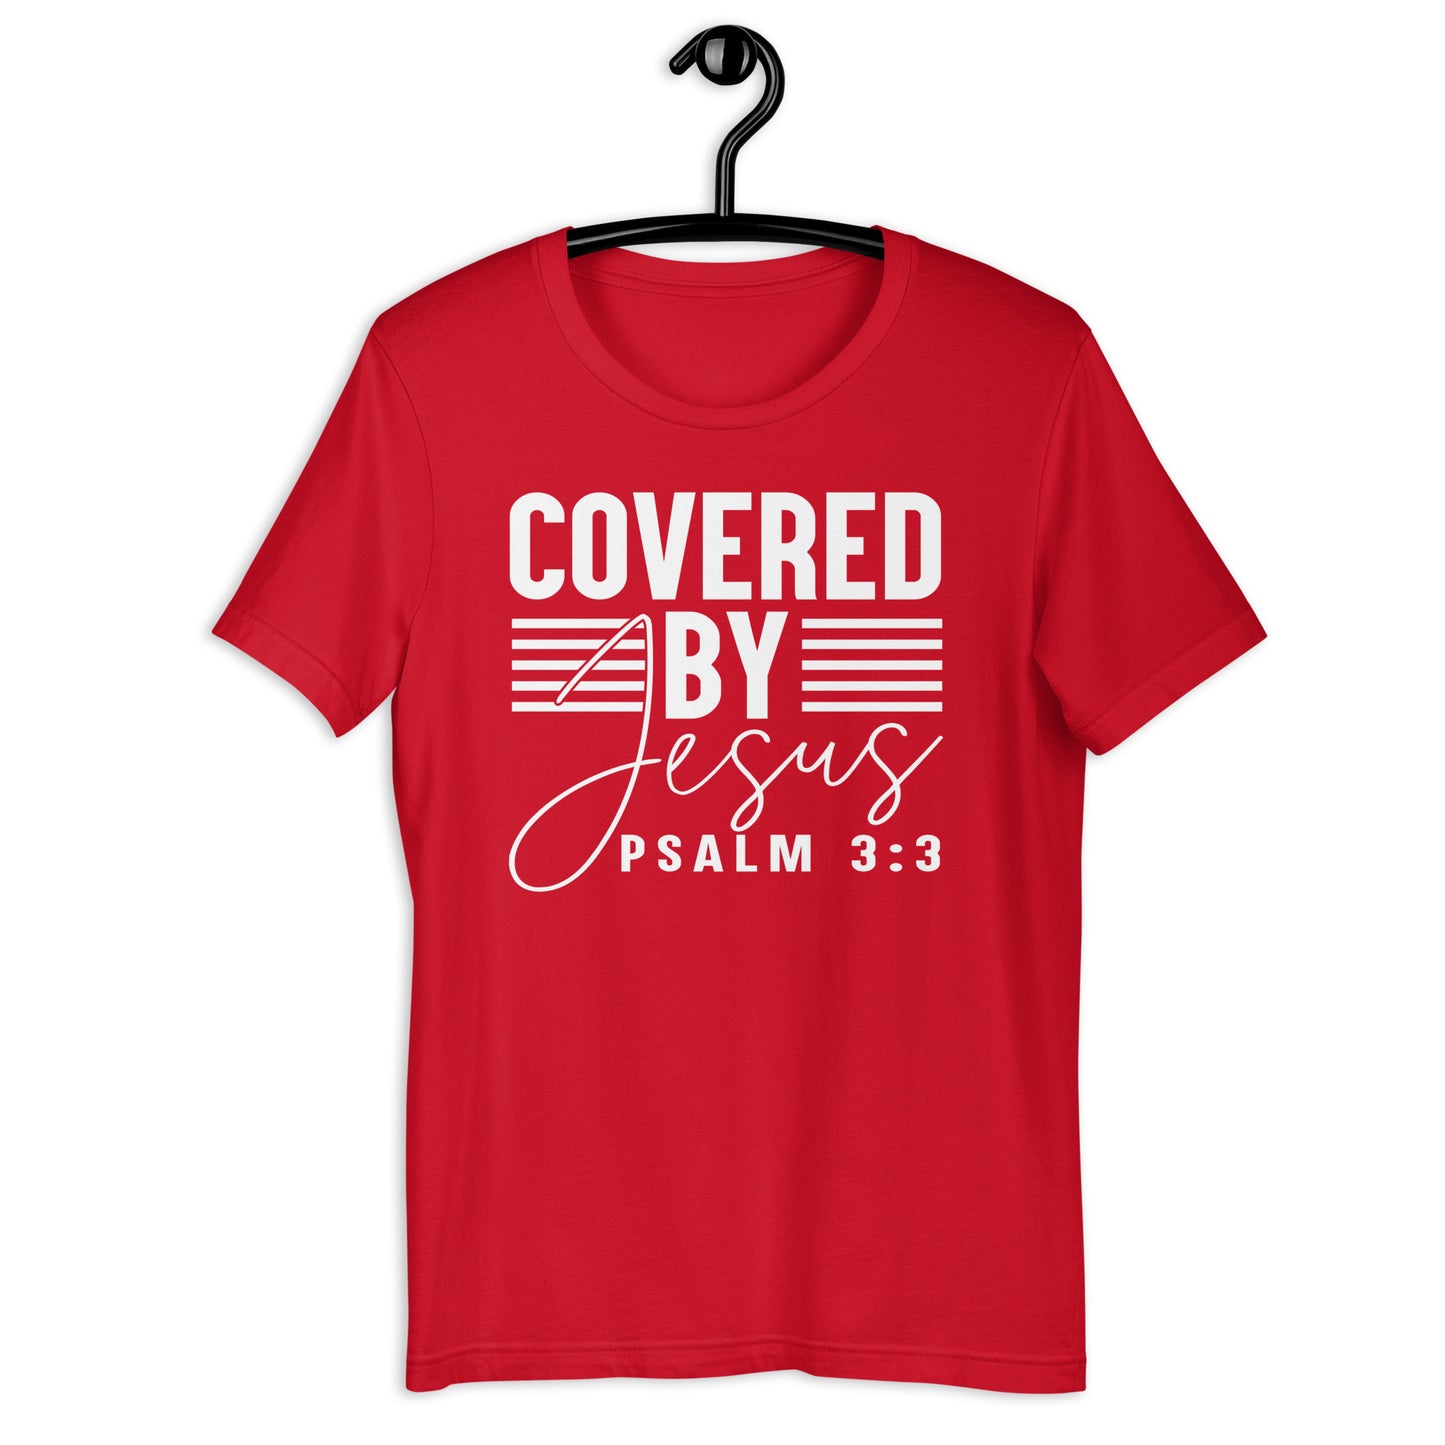 Covered by Jesus T-Shirt Various Colors